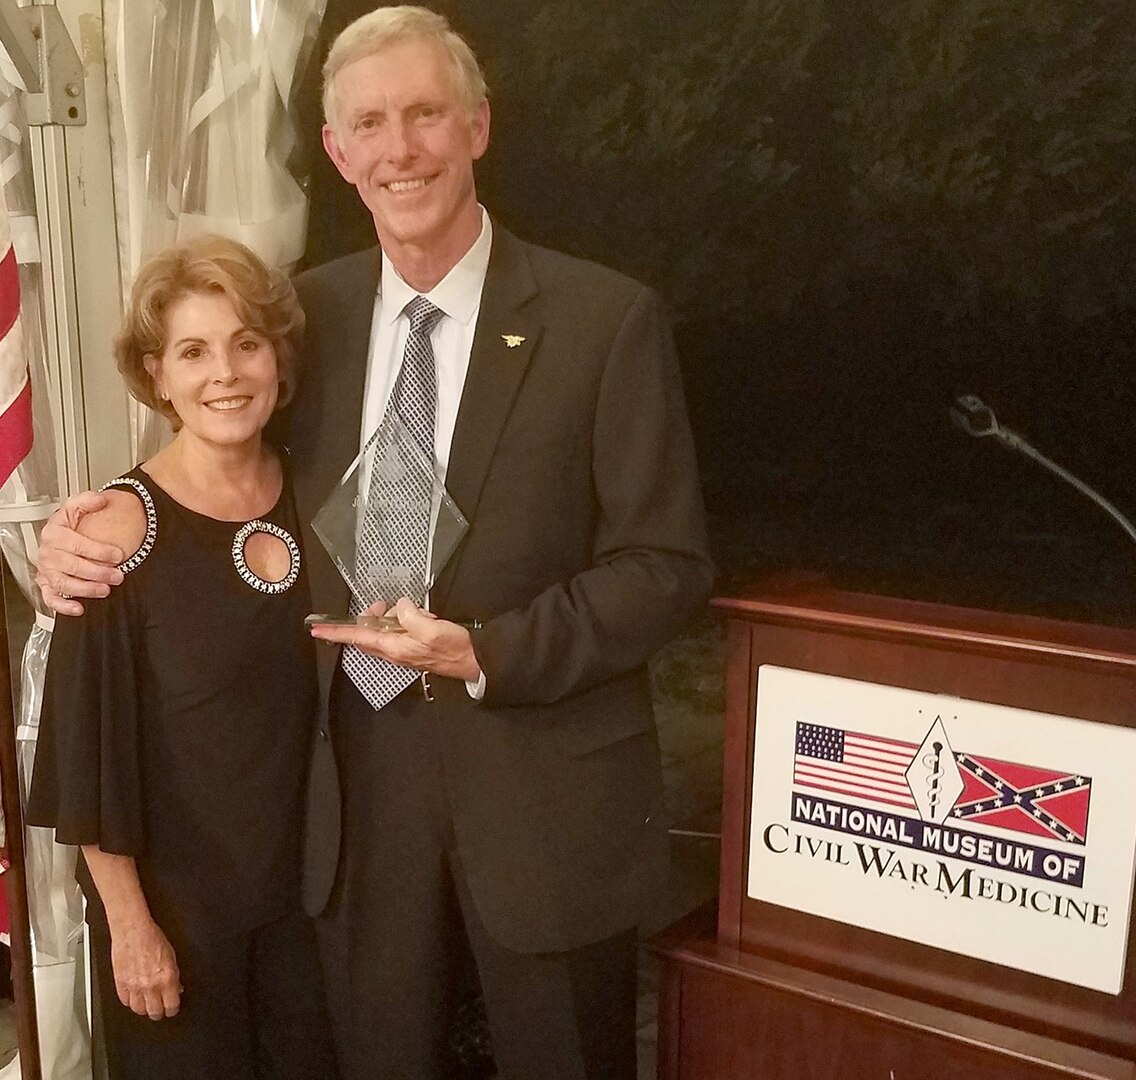 Dr. Frank Butler and his wife Debbie during the award ceremony where he was presented the 10th Annual Major Jonathan Letterman Medical Excellence Award by the National Museum of Civil War Medicine Sept. 15.